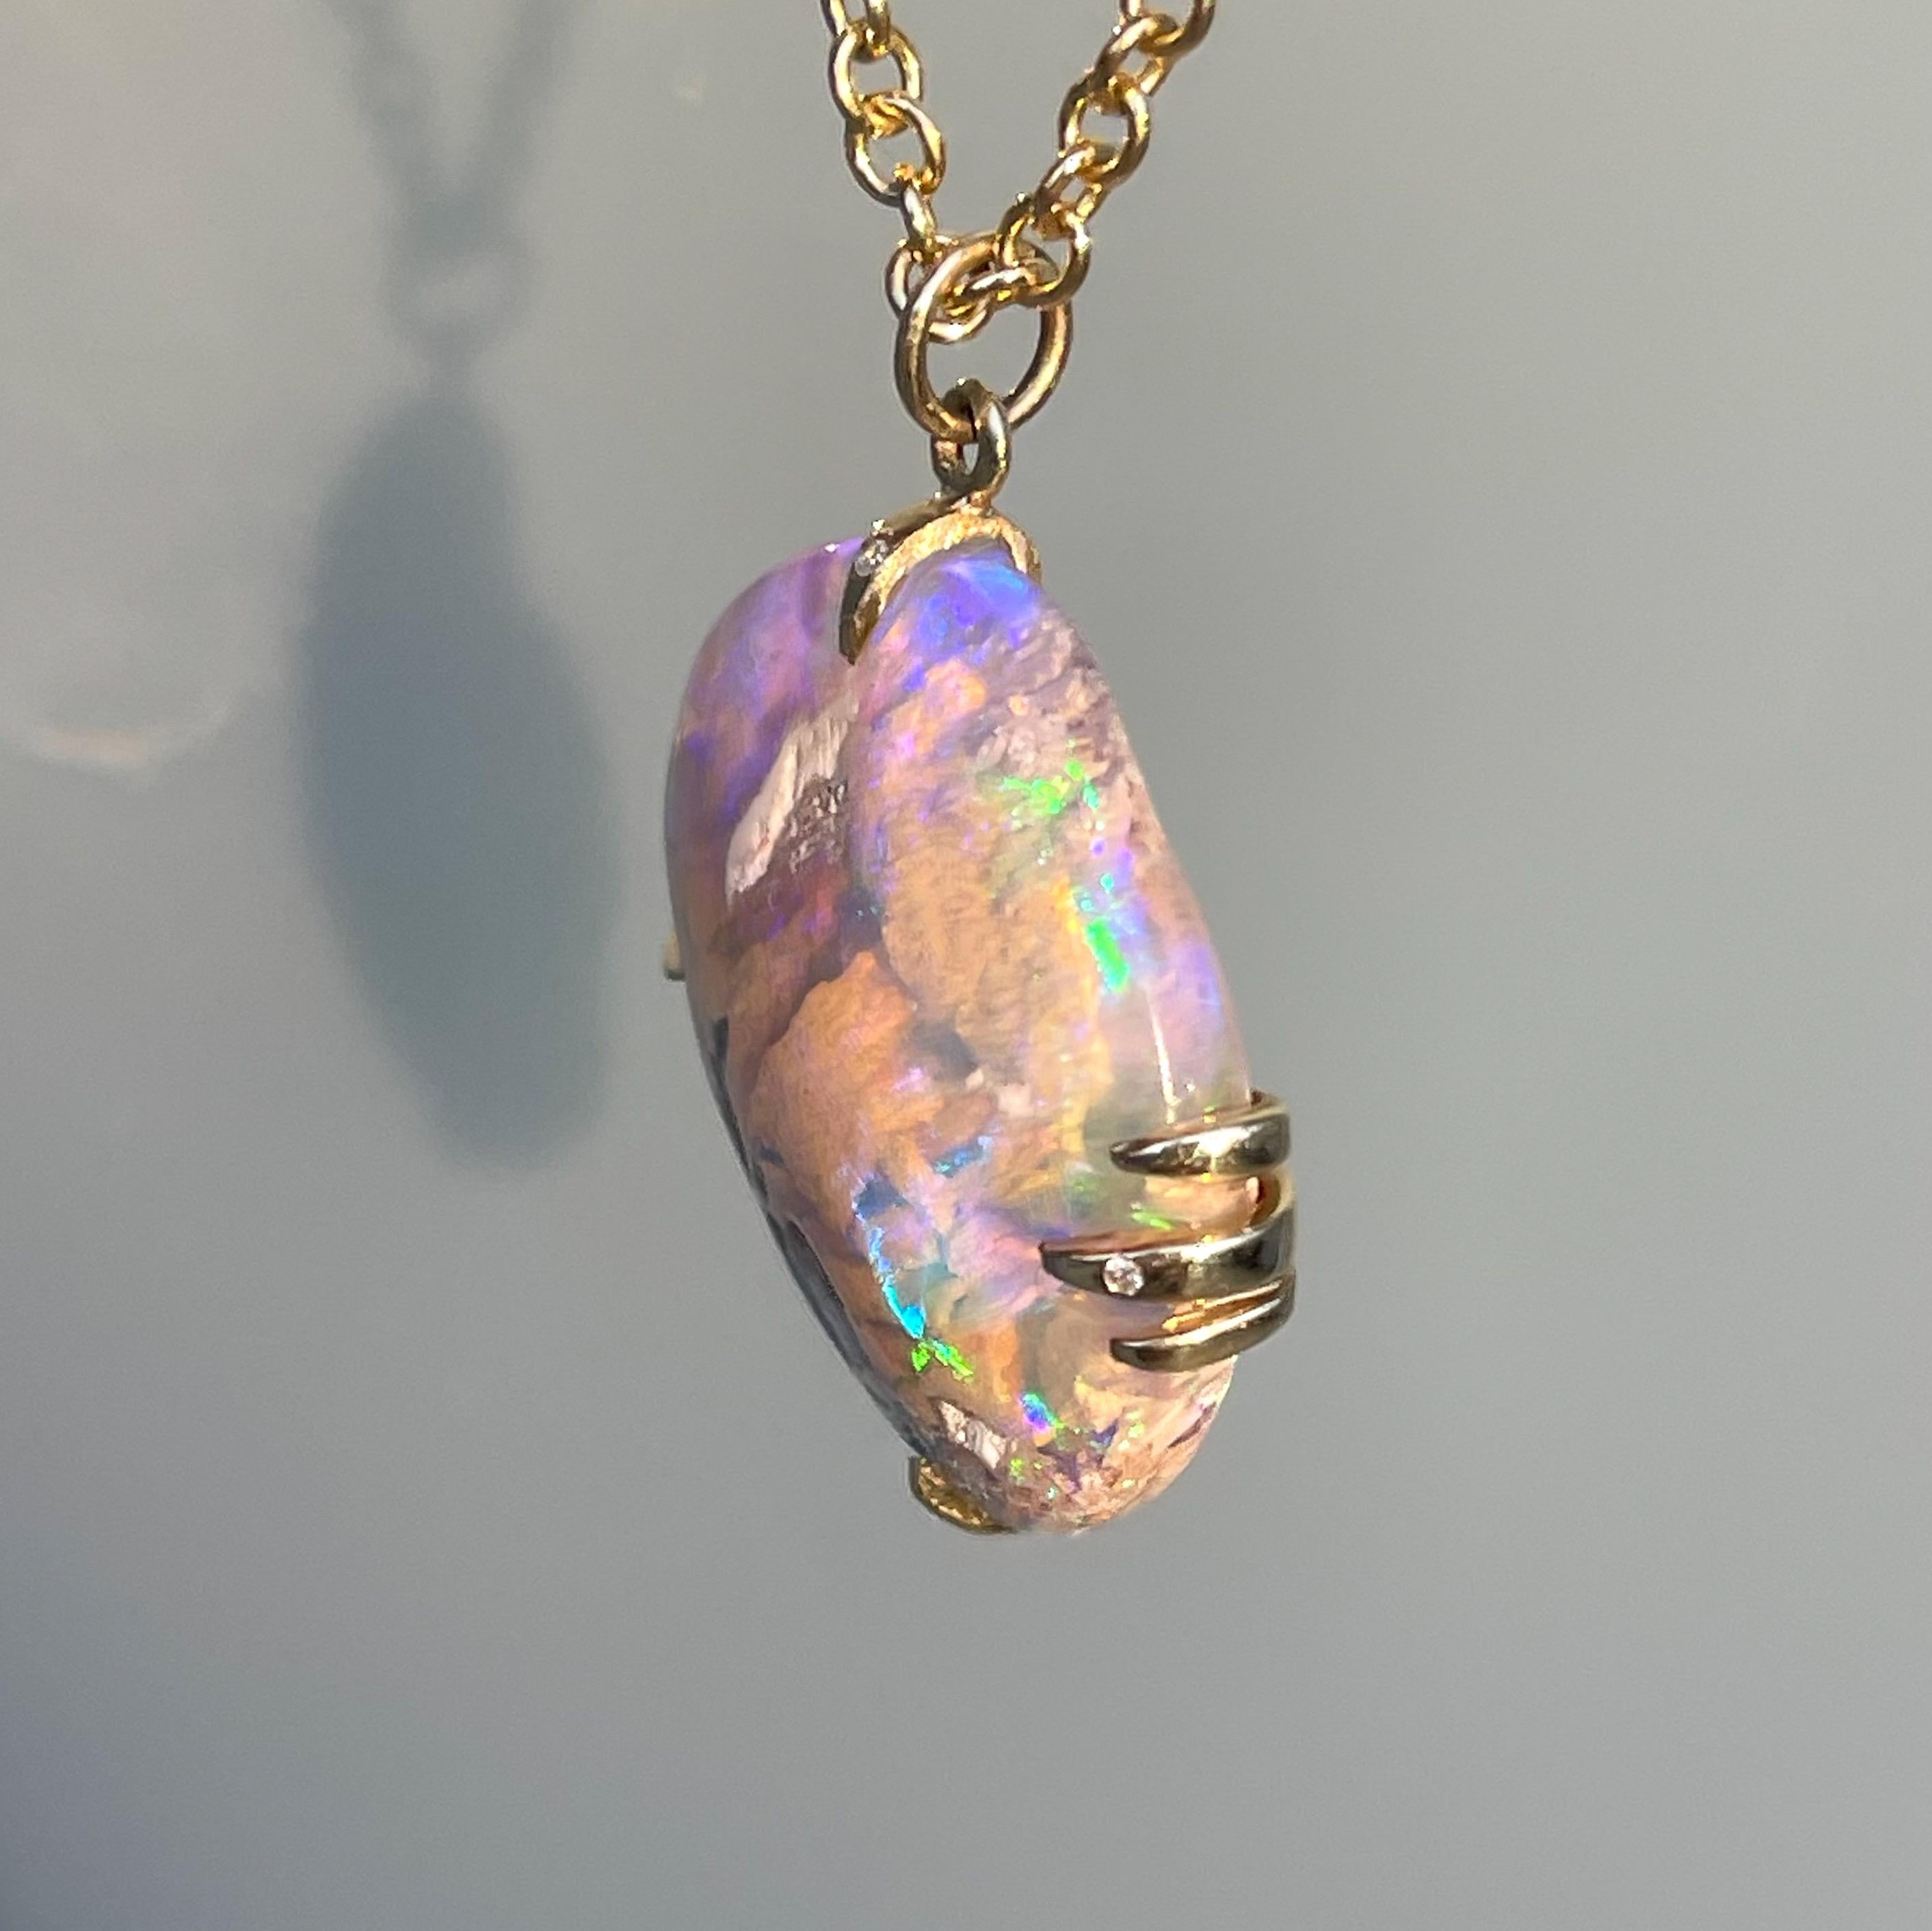 NIXIN Jewelry A Walk on the Moon Australian Opal Necklace in Gold with Diamonds 4